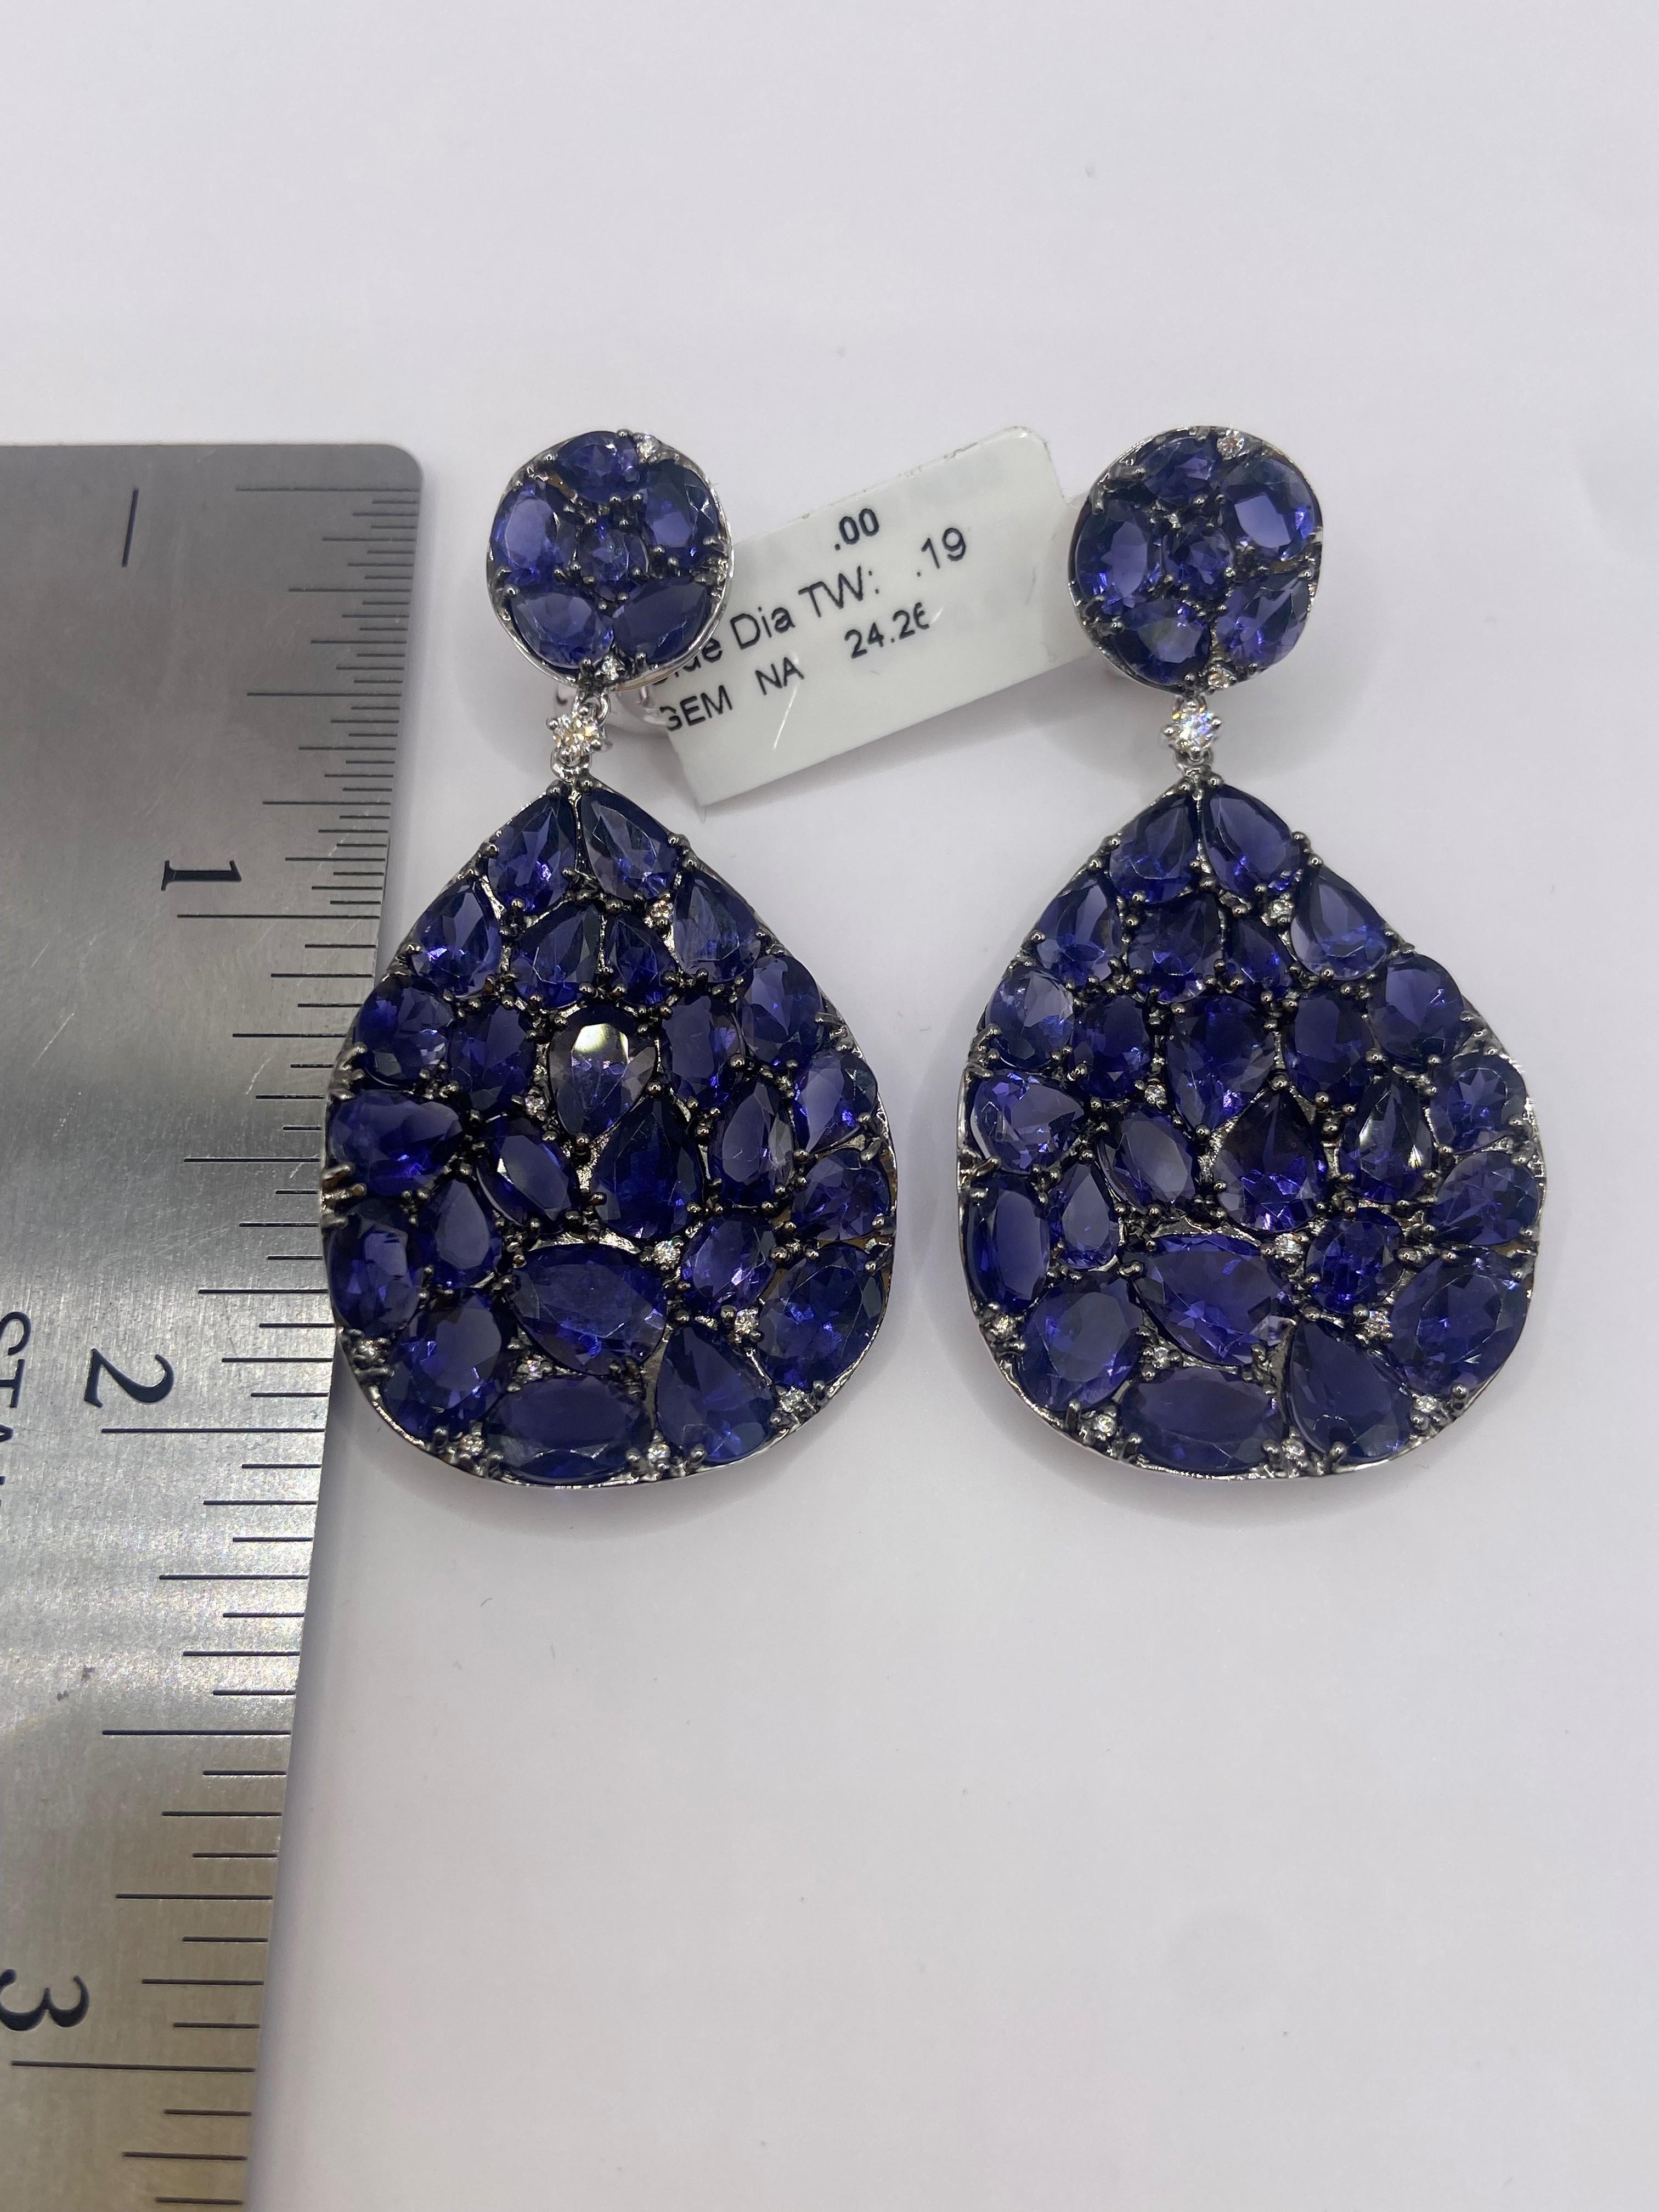 • 18KT White Gold
• 24.45 Carats

• Number of Round Diamonds: 24
• Carat Weight: .19ctw
• Color: F
• Clarity SI1

• Number of Rose Cut Blue Iolite: 62
• Carat Weight: 24.26ctw

This pair of earrings is made with 62 rose cut blue iolite stones,